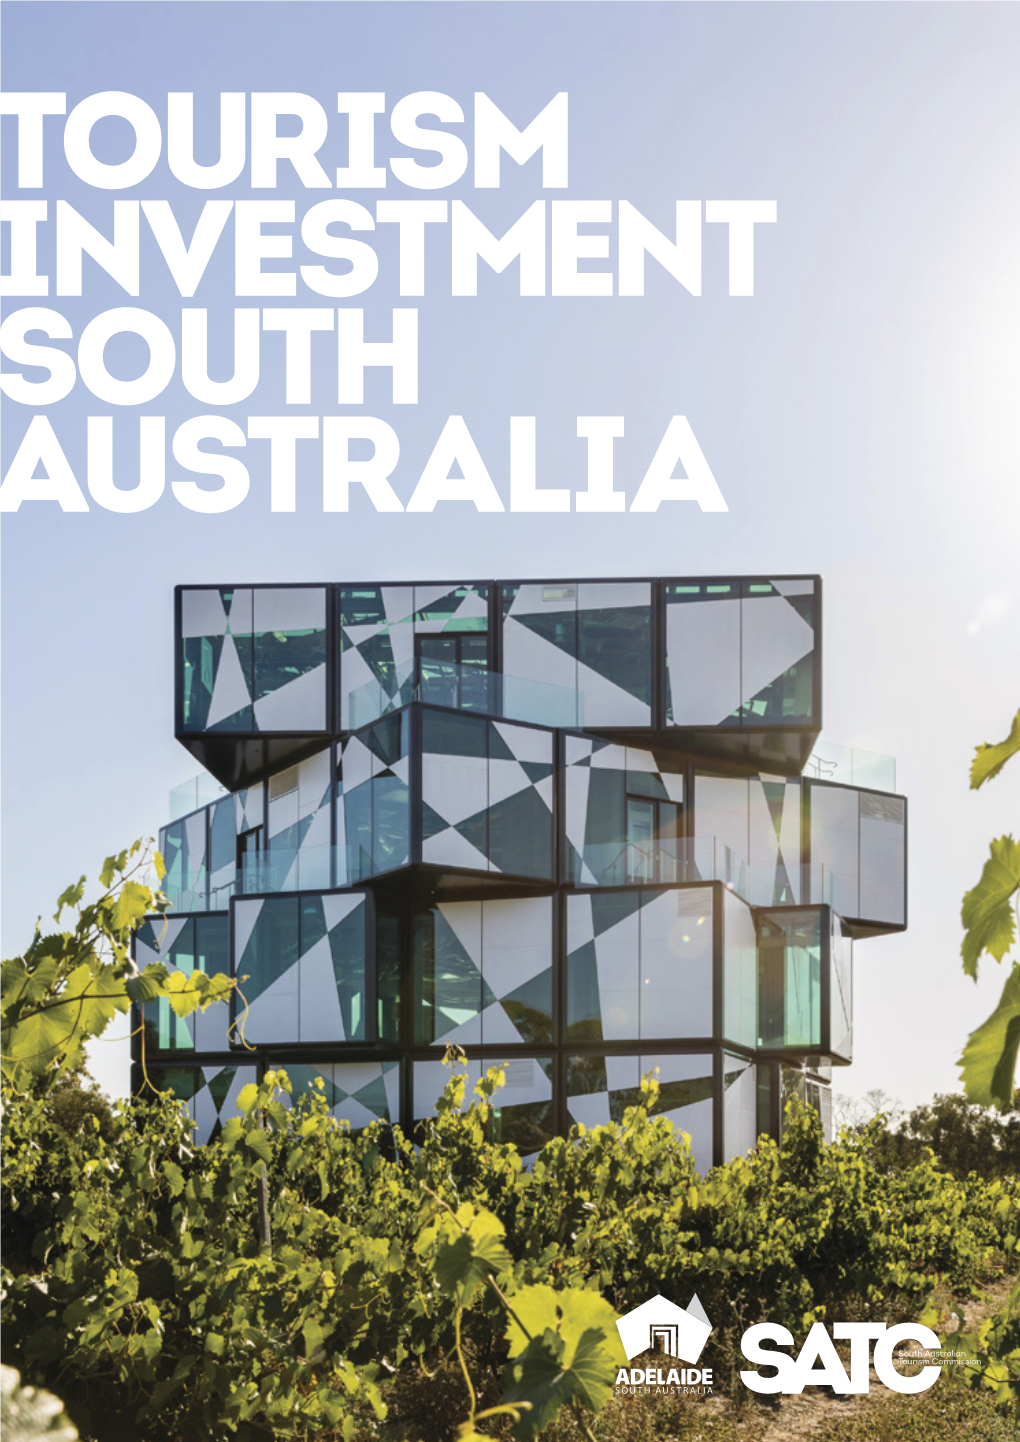 TOURISM INVESTMENT SOUTH AUSTRALIA Welcome to SOUTH AUSTRALIA